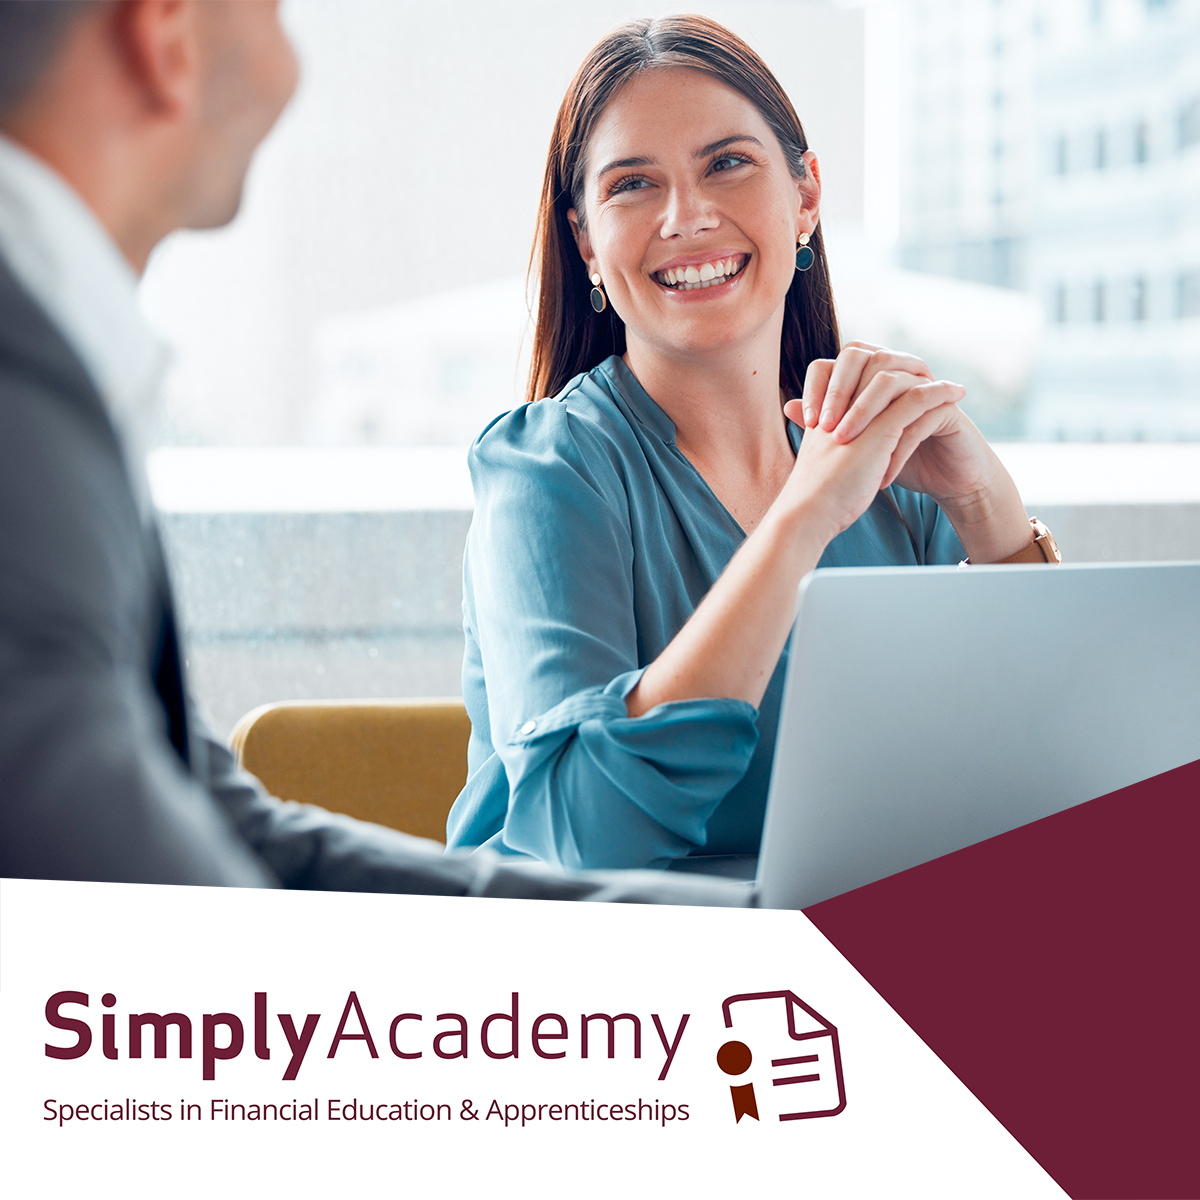 #FinancialServices #Apprentices must be aged 16+ but did you know there’s no upper age limit?

Apprenticeships allow career-changers to ‘earn while they learn’, gaining valuable experience and a respected qualification.

Find out more at simplyacademy.com/apprenticeship…